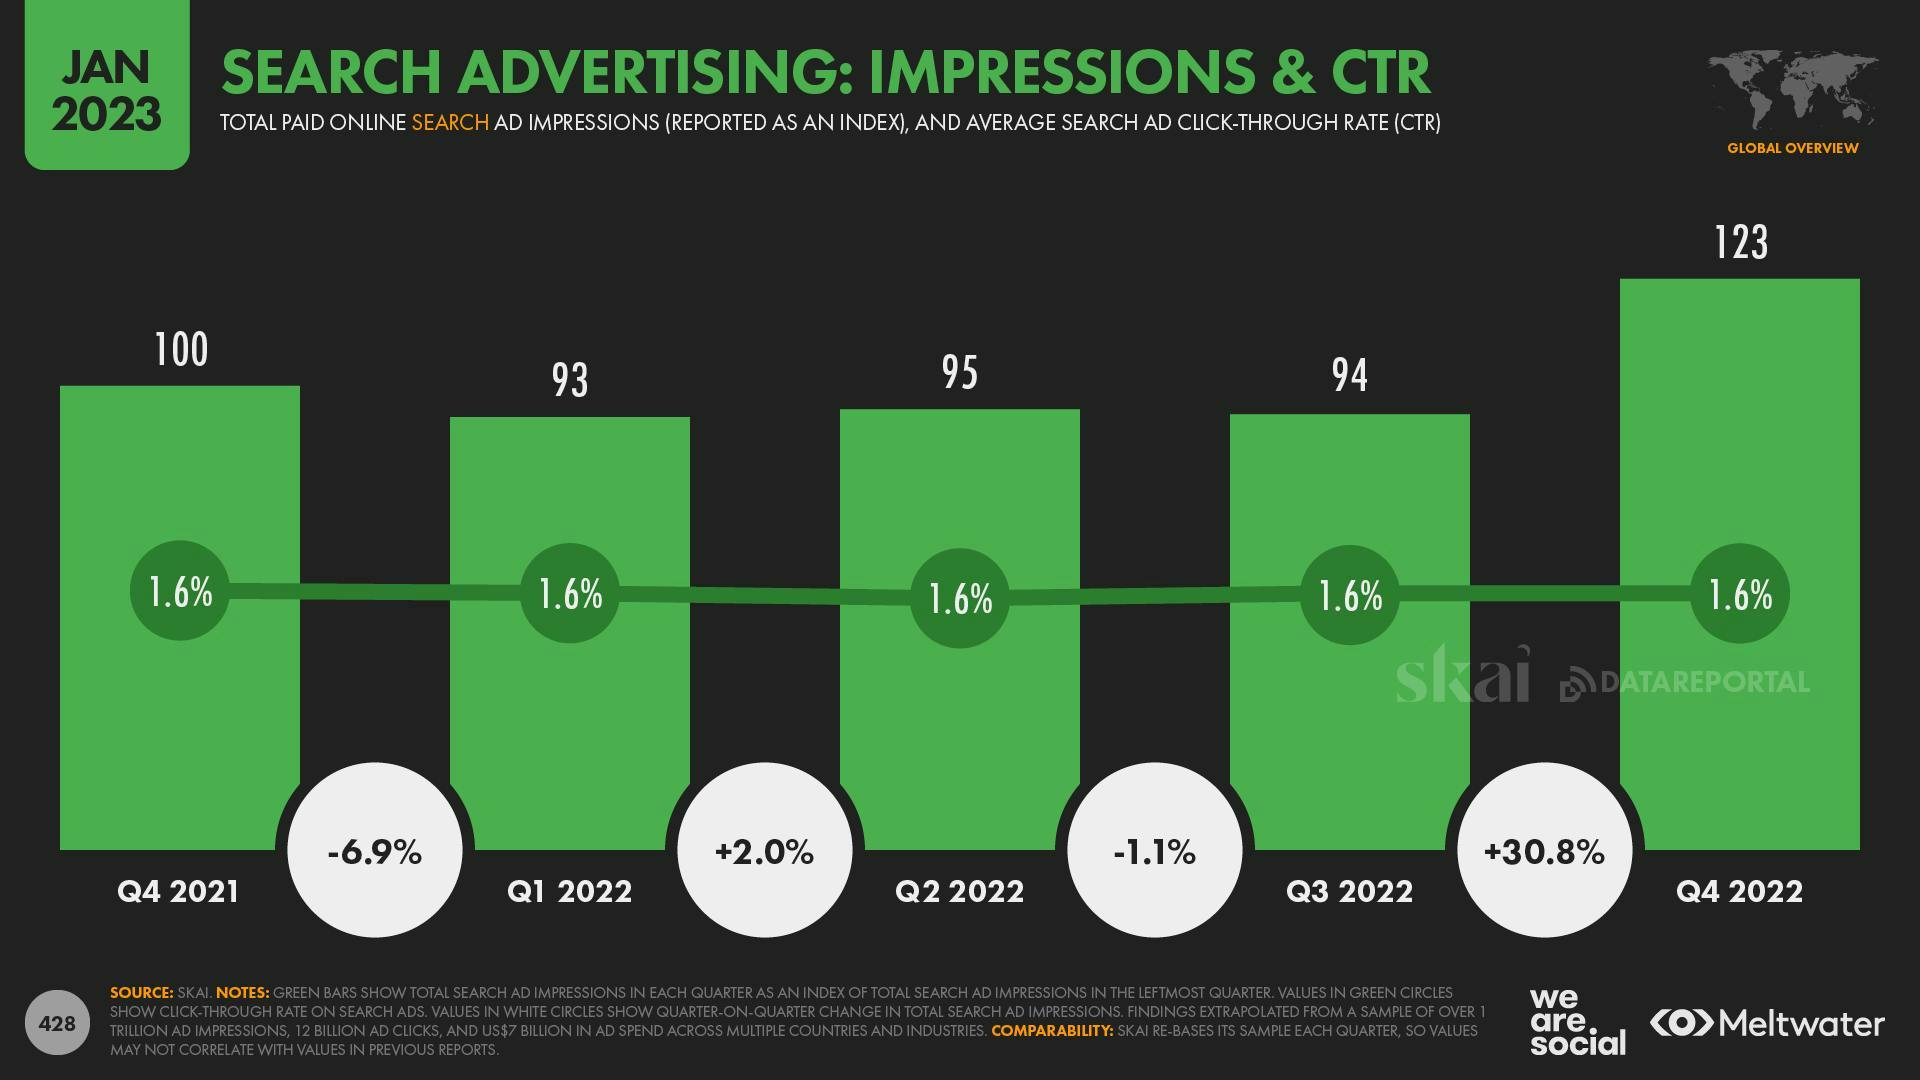 Search advertising: impressions & CTR 2021 - 2022